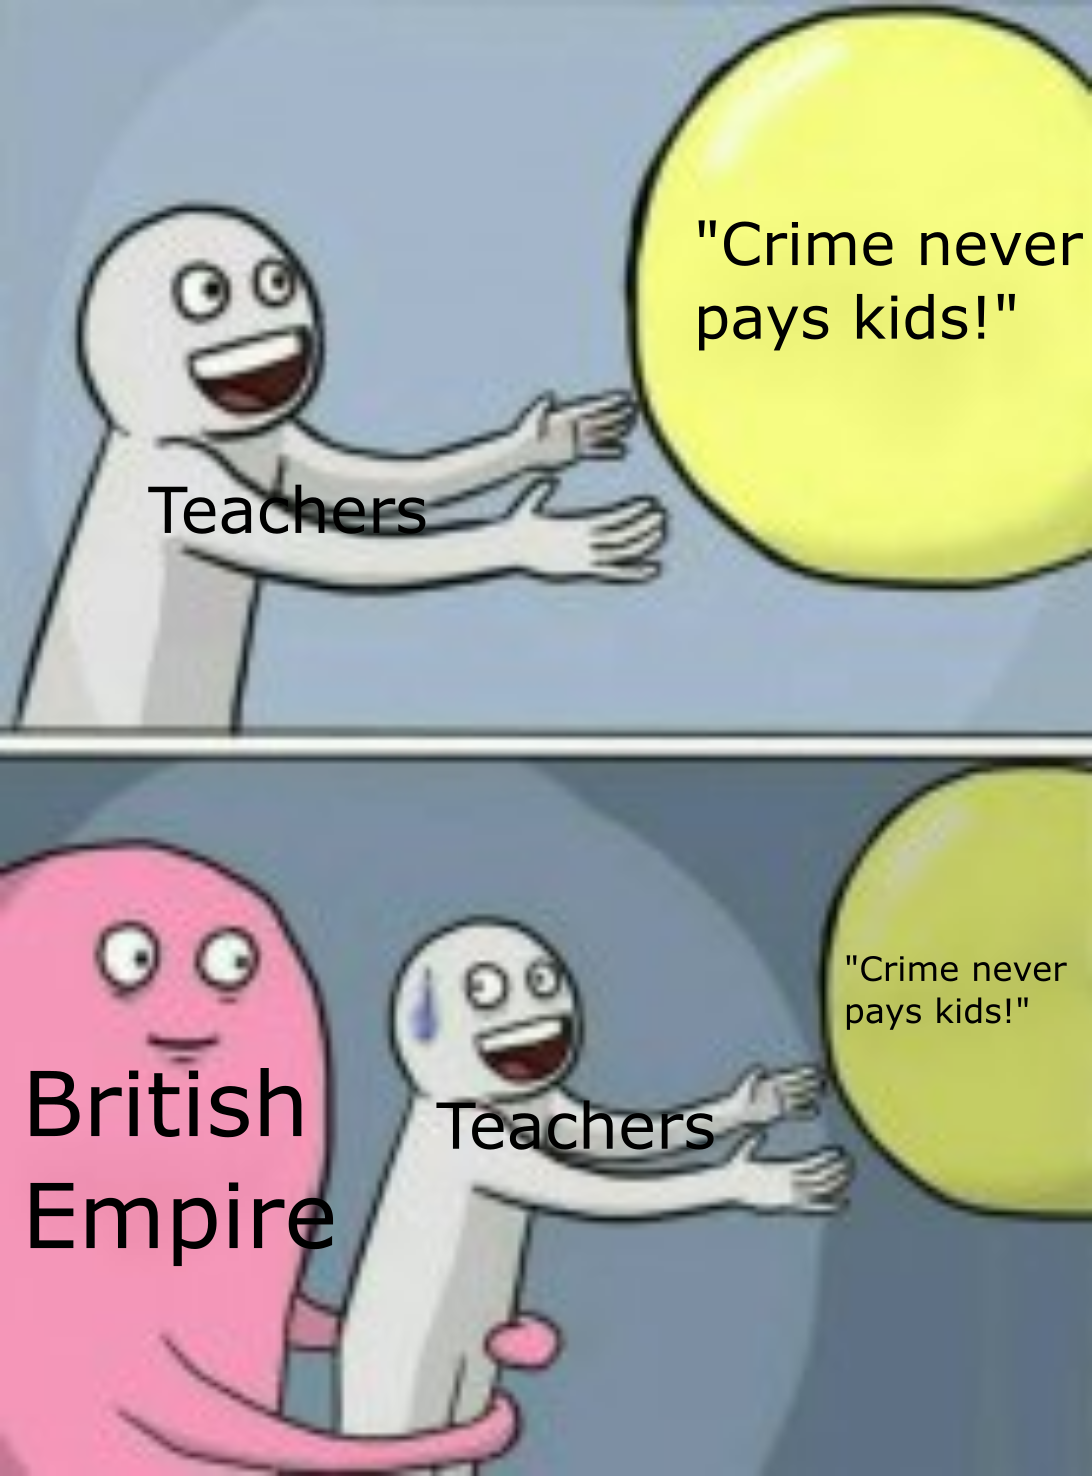 Ah yes the Opium war. The time when the British resorted to "trading" drugs for their tea addiction